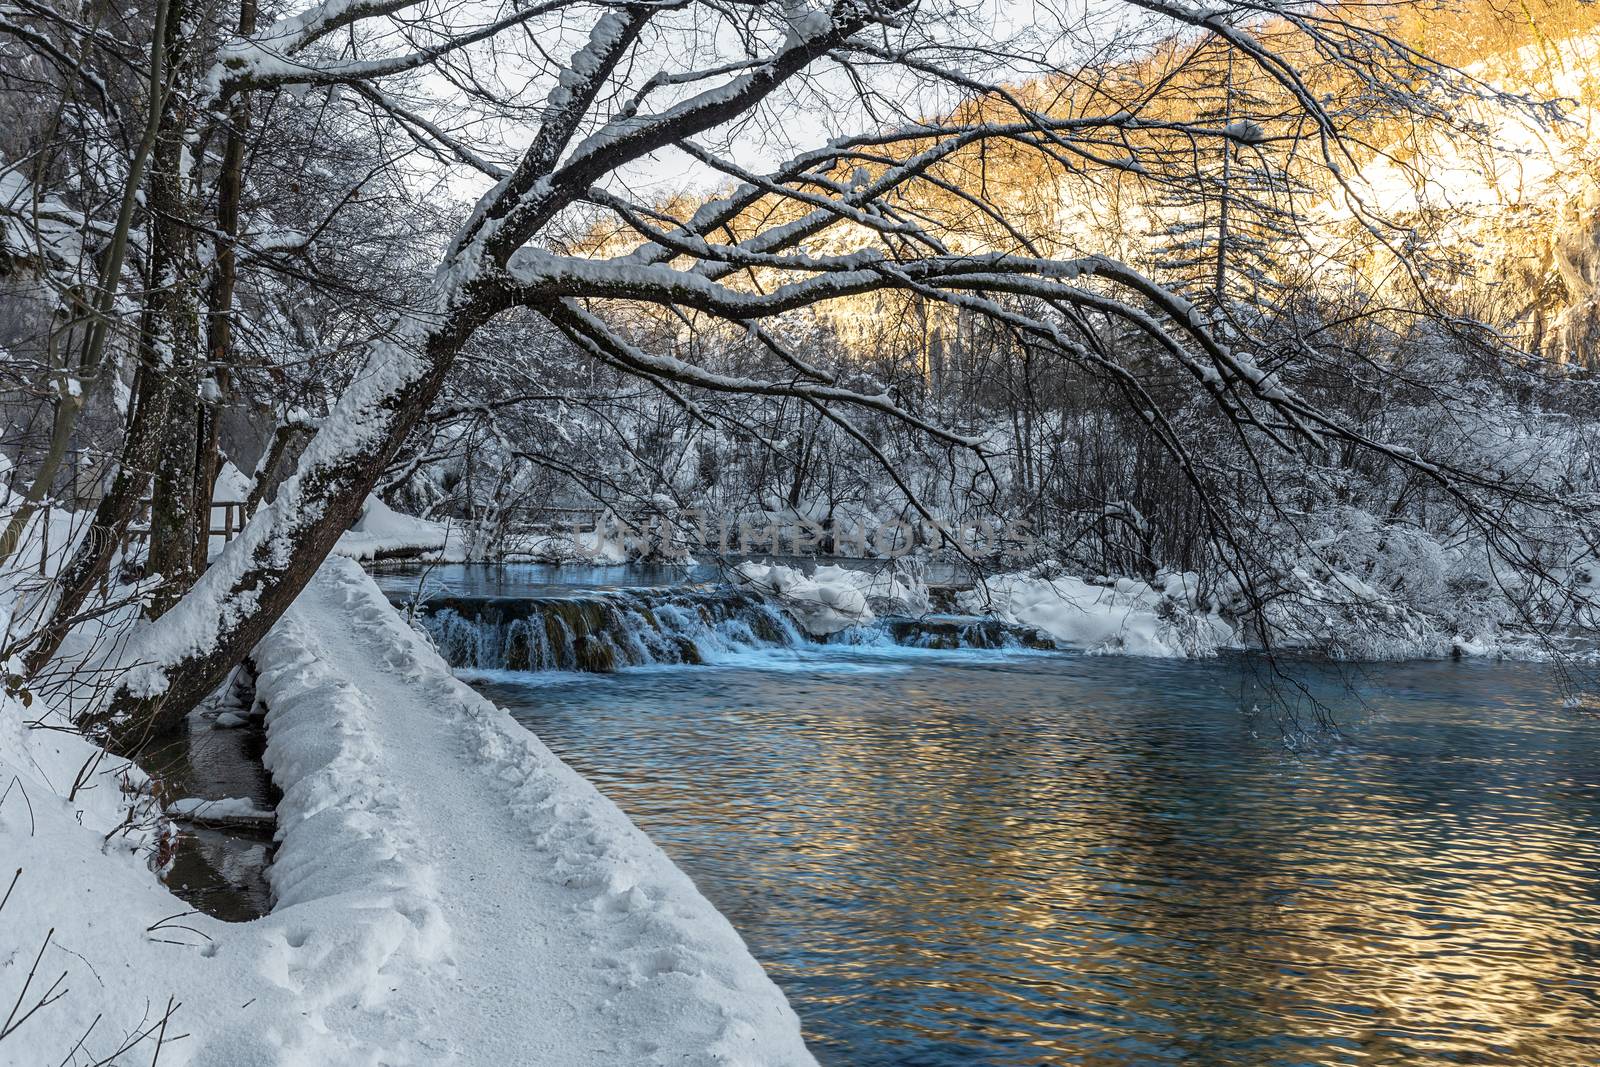 Plitvice lakes during winter with high level of snow